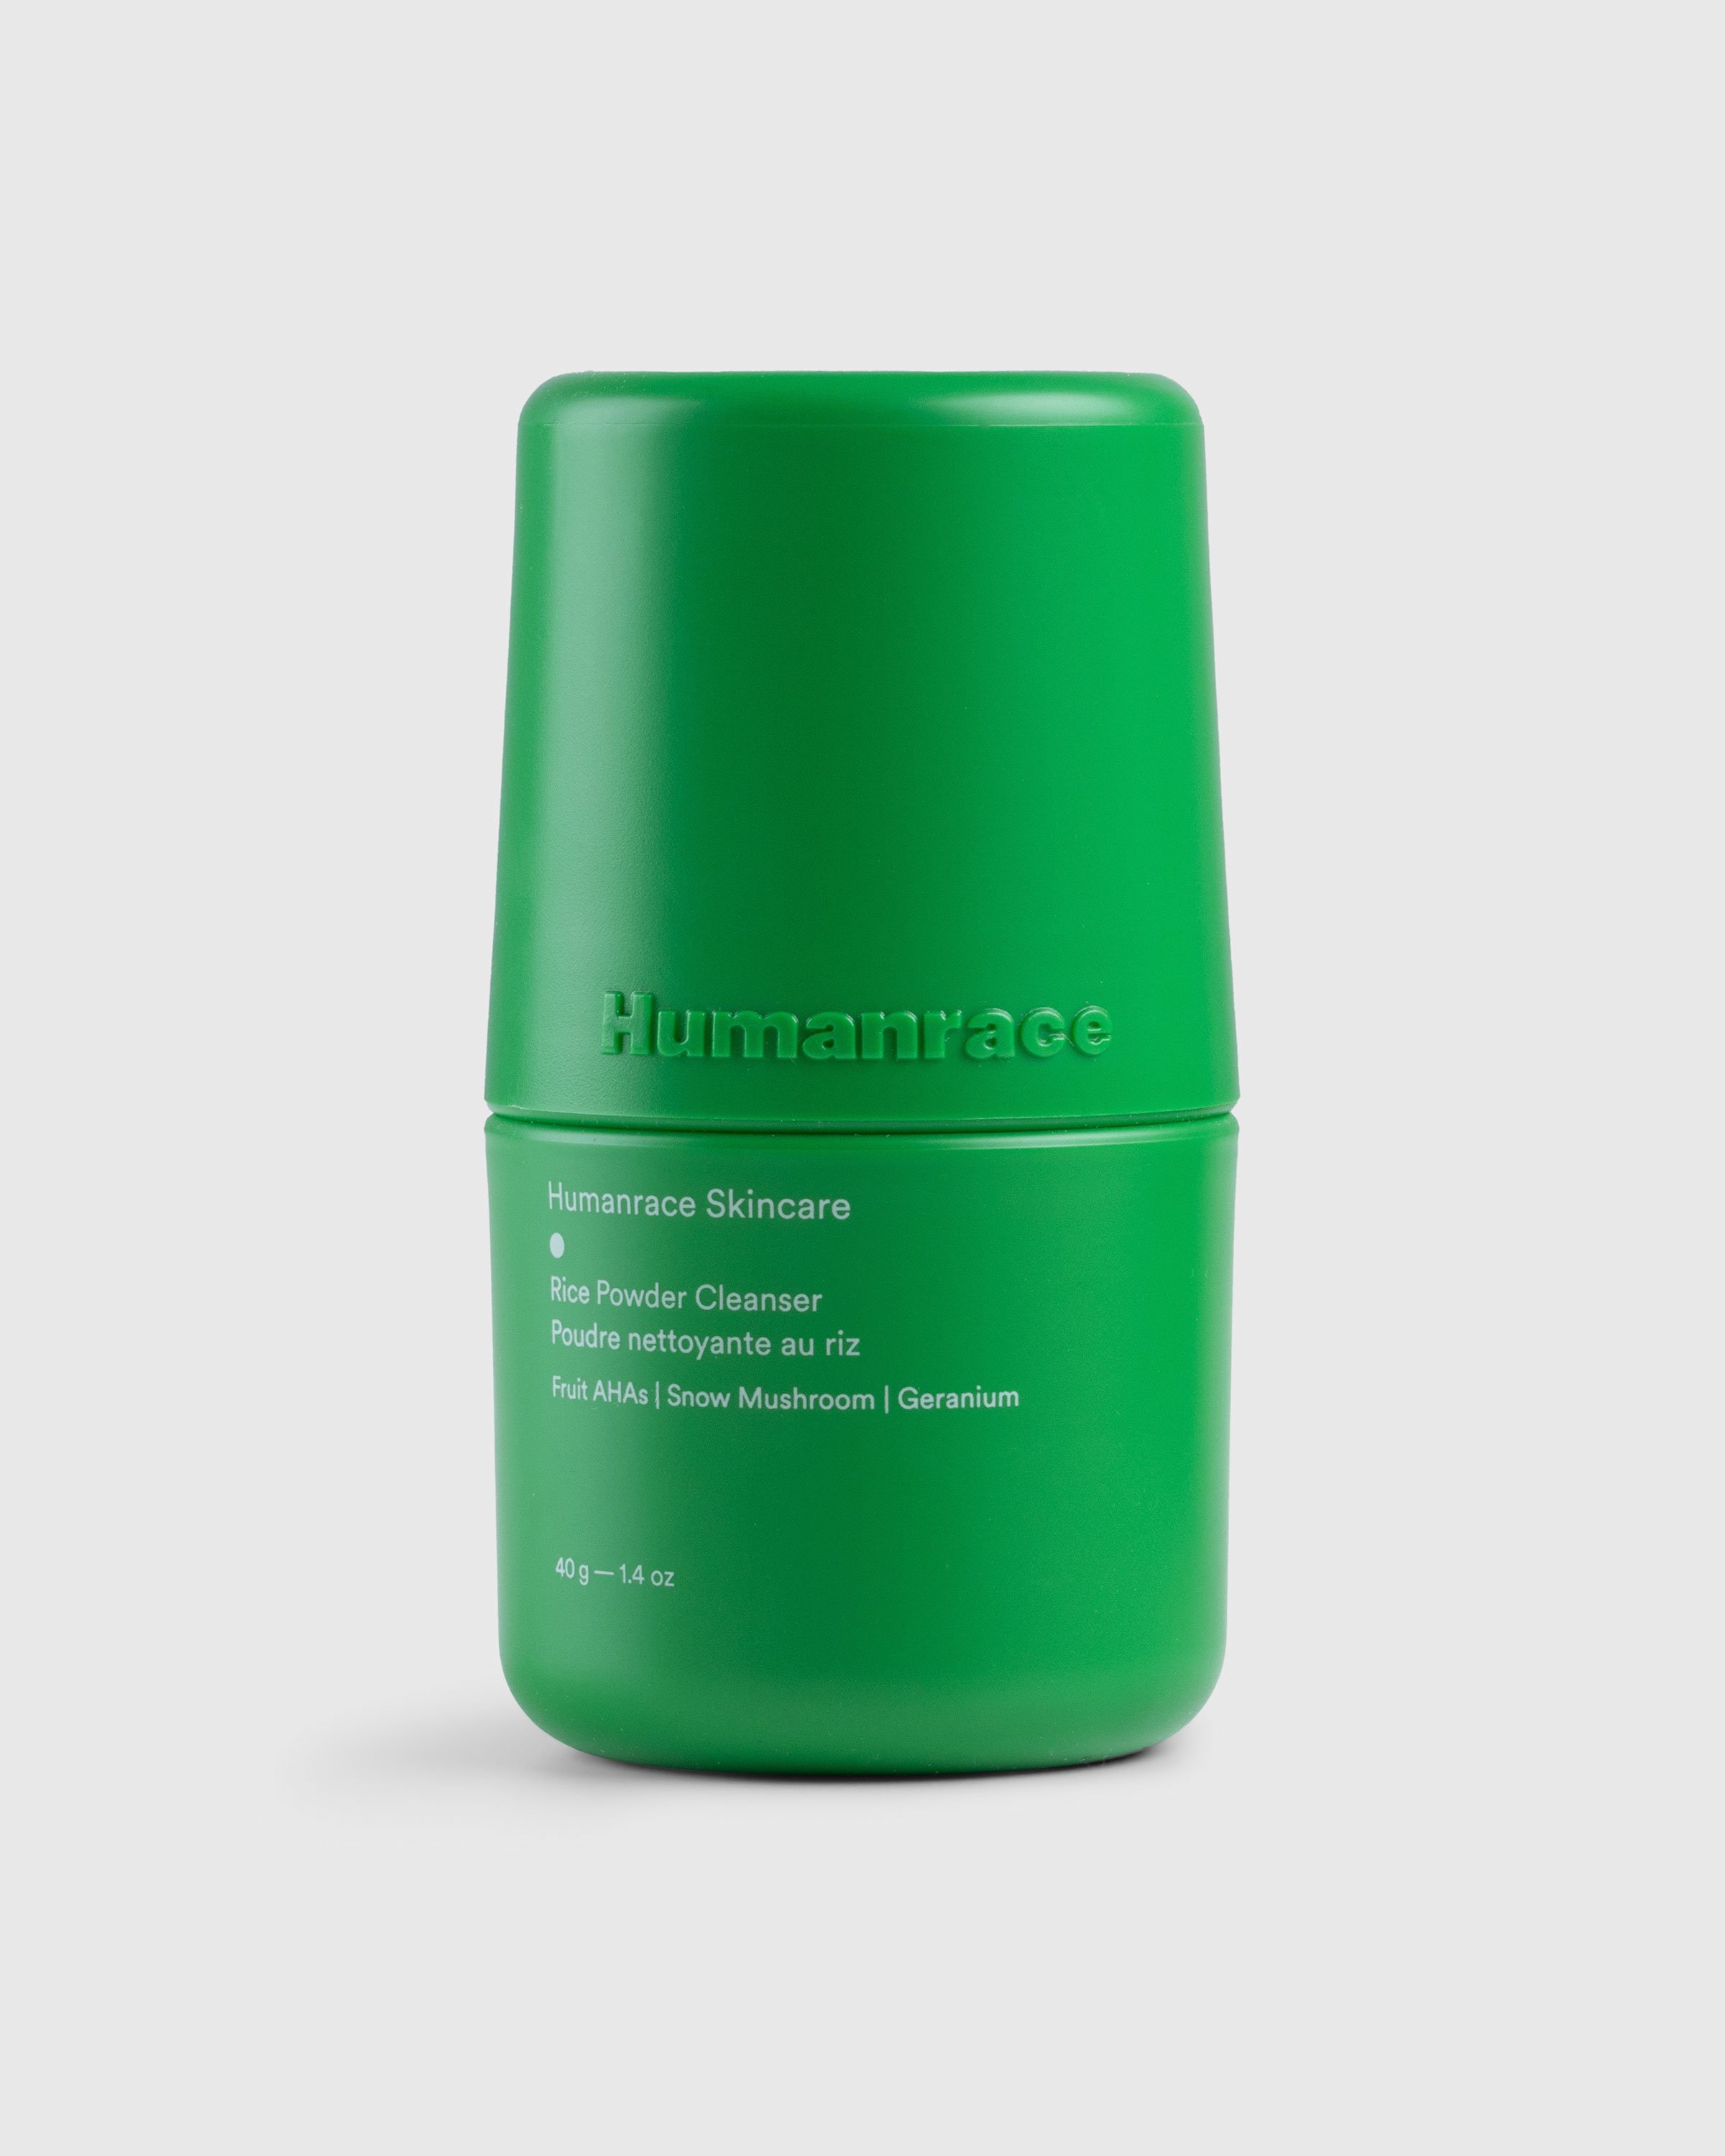 Humanrace - Rice Powder Cleanser - Lifestyle - Green - Image 1